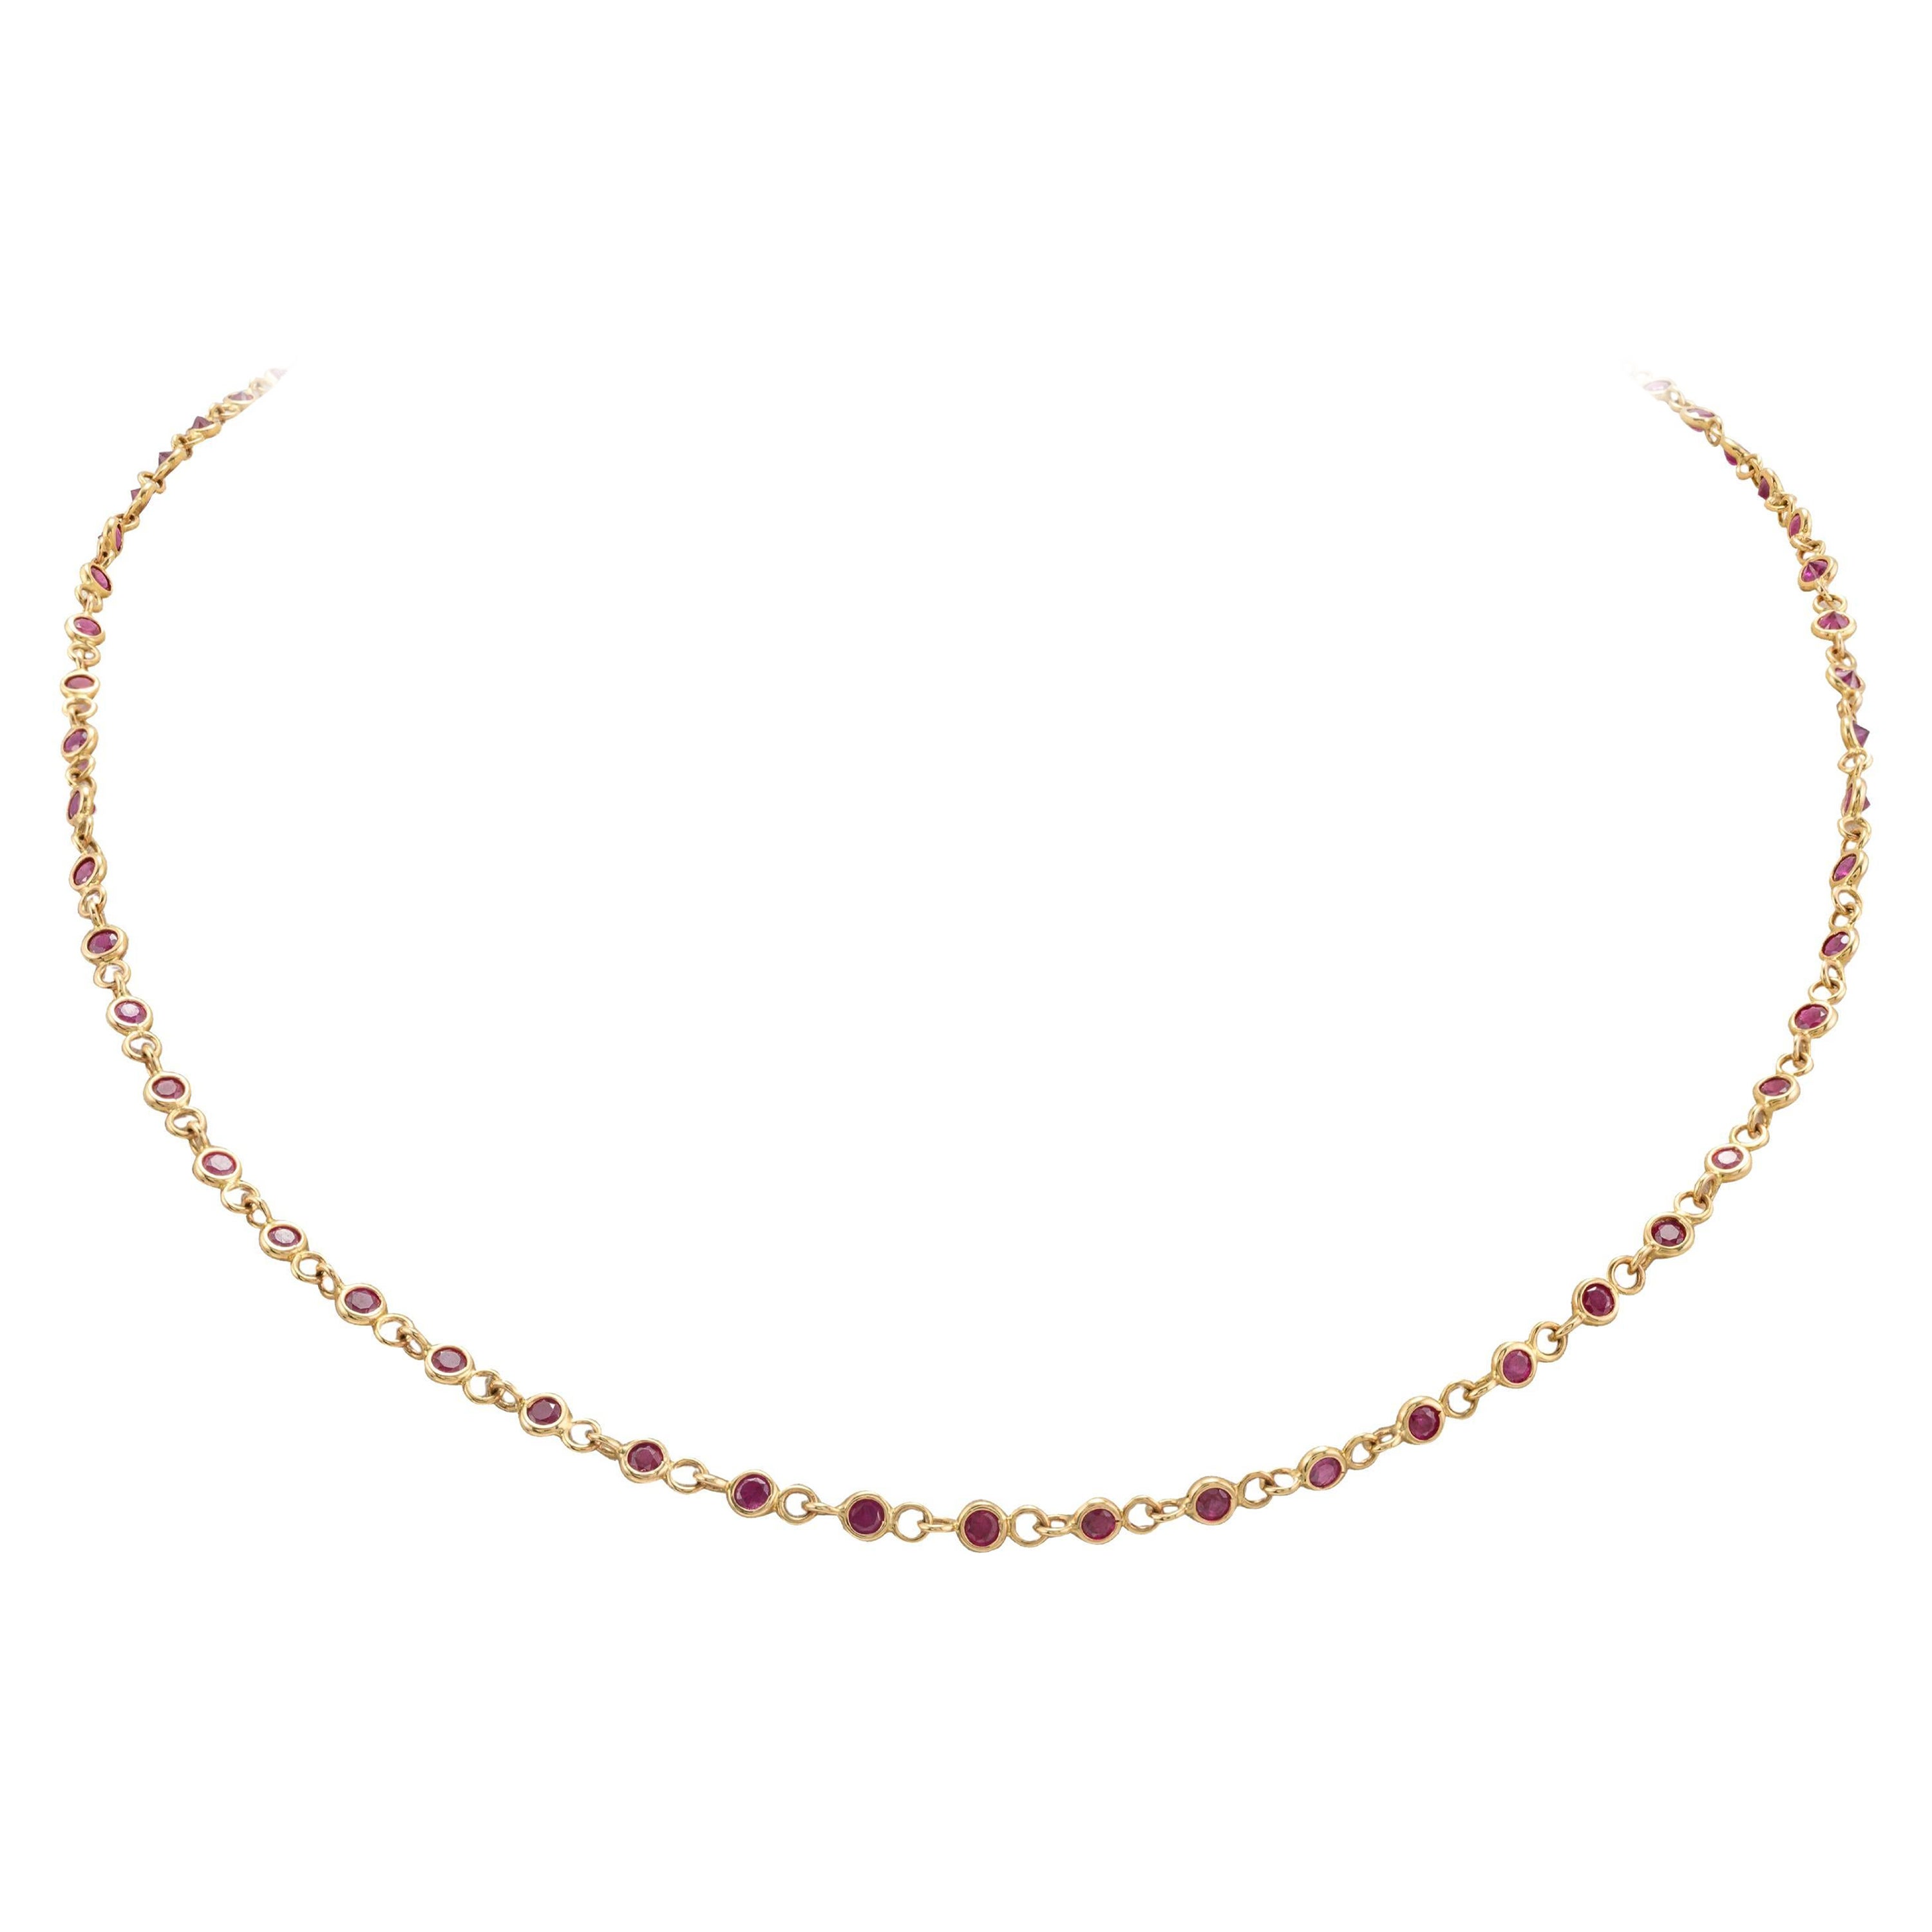 Handmade Ruby Station Chain Necklace 14k Yellow Gold, Grandma Gift Christmas For Sale